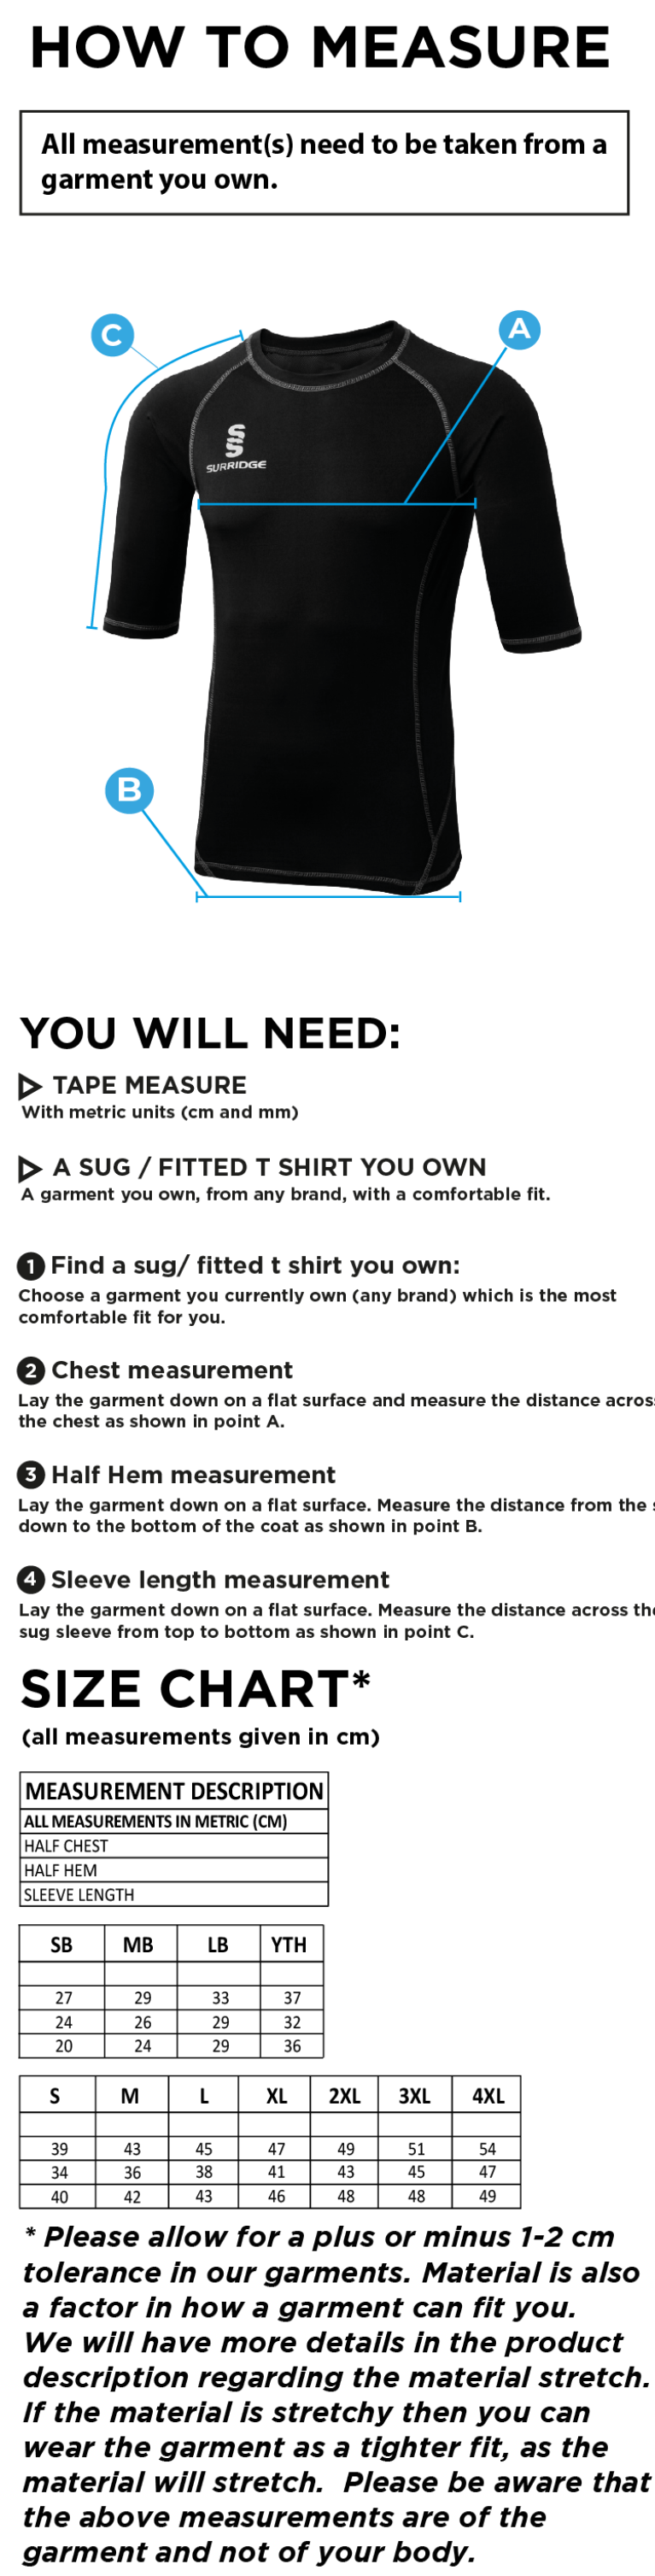 Premier Short Sleeve Sug Navy - Size Guide